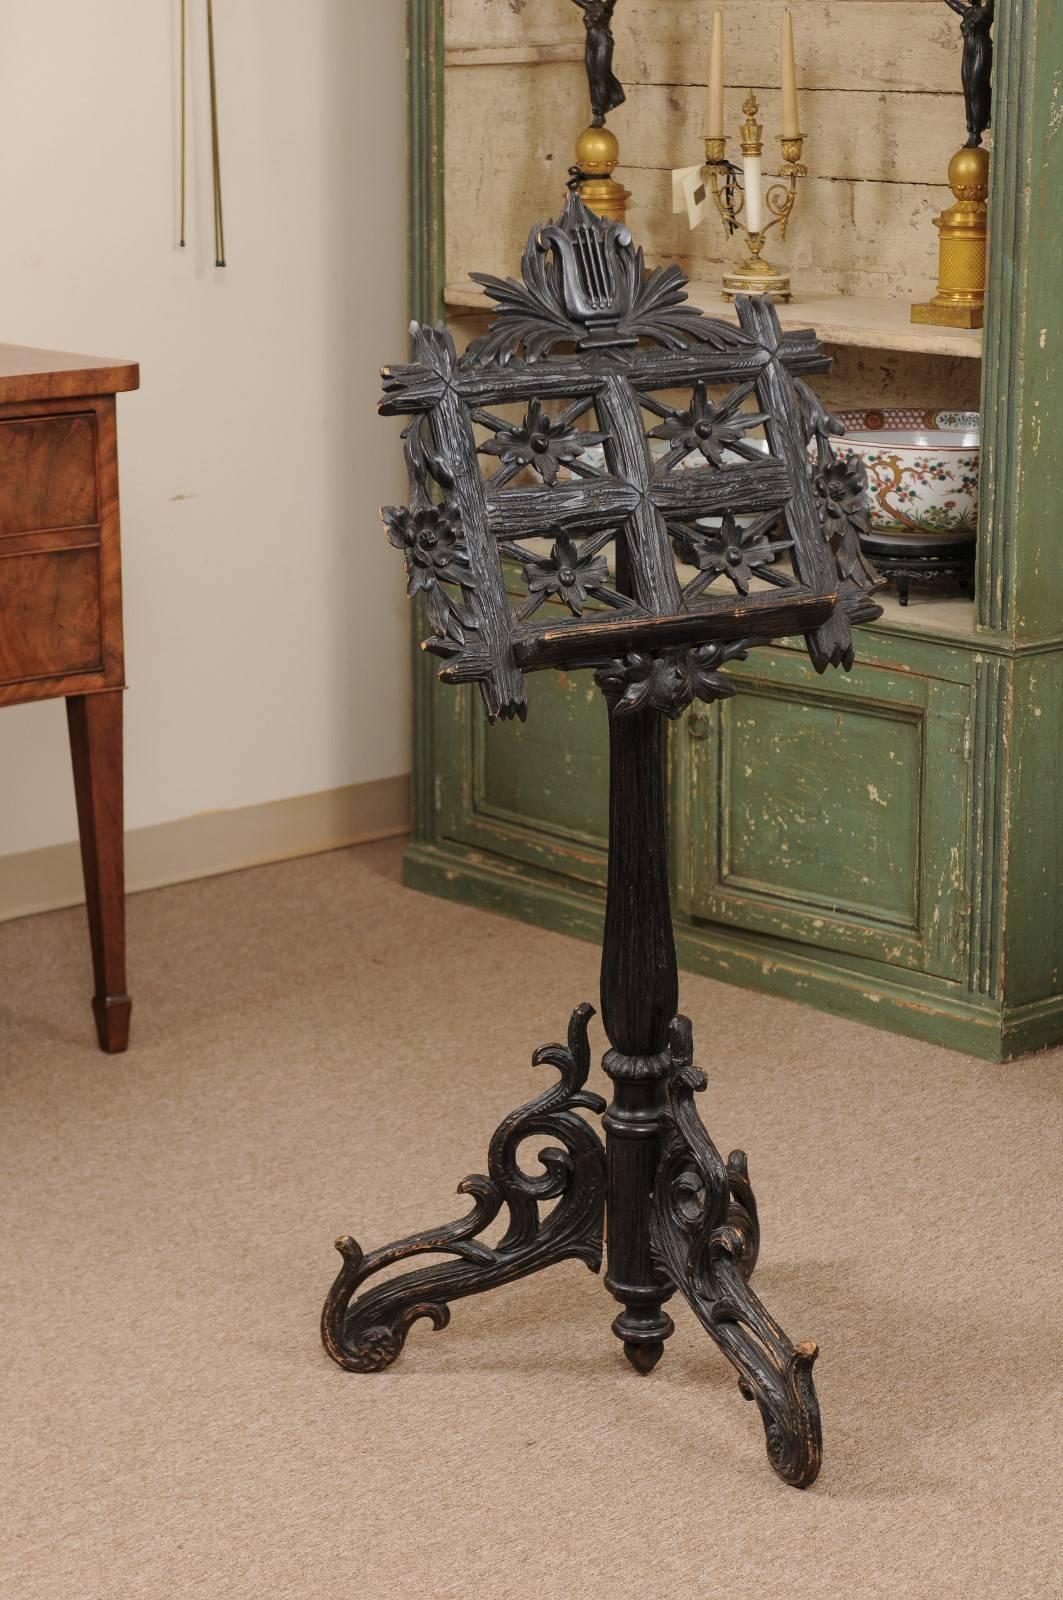 Carved Black Forest music sand with scroll decorated tripod base, lyre (music trophy) crest, and floral decoration, late 19th century, France.